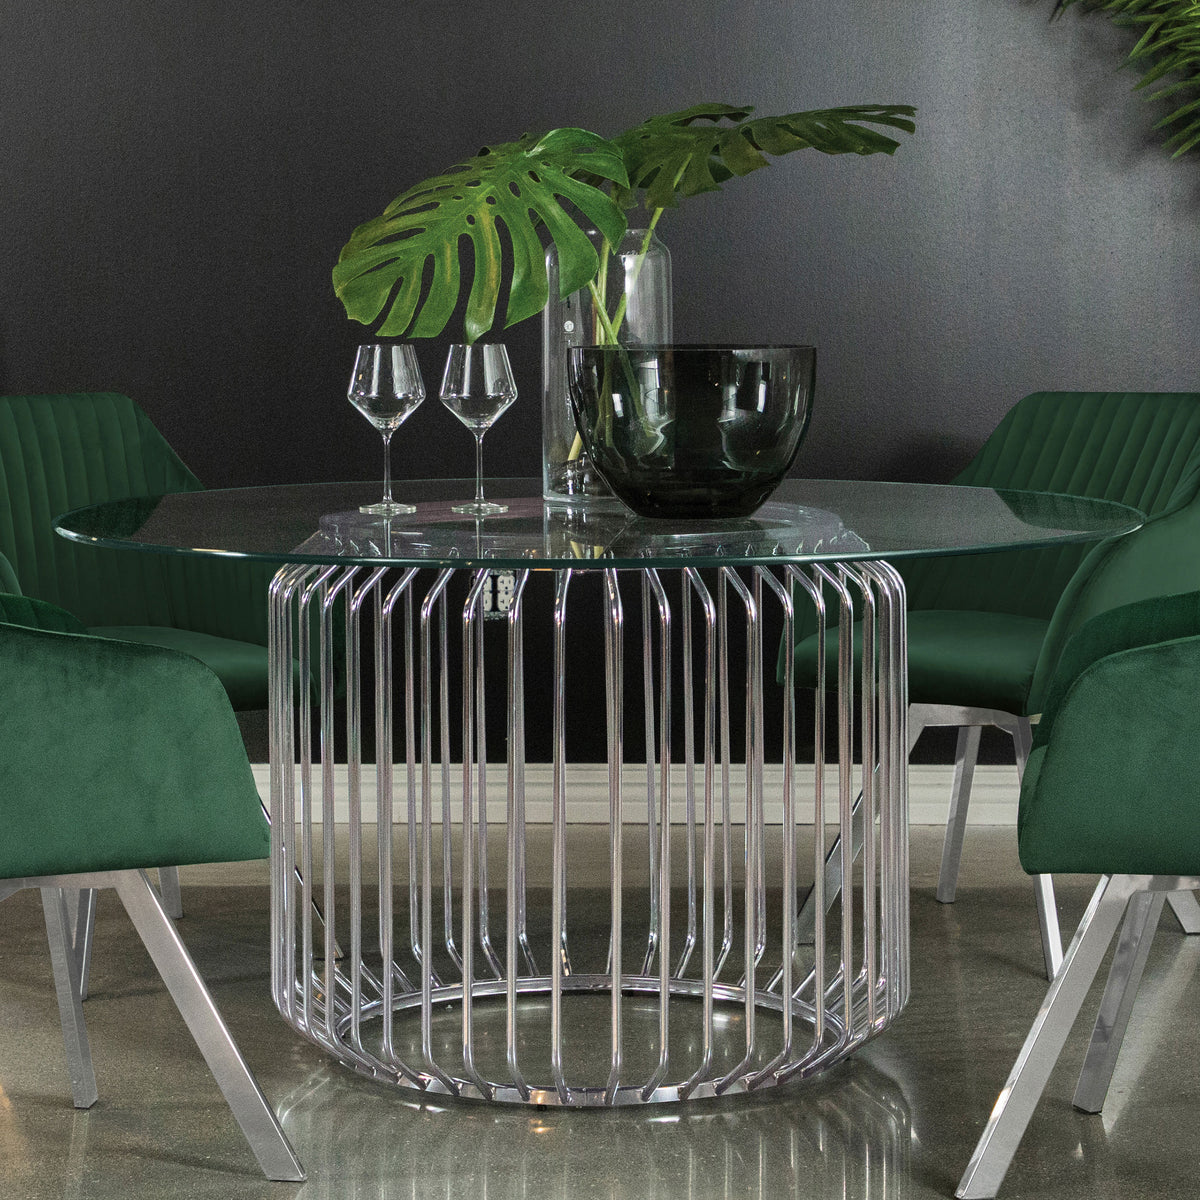 Veena 60" Round Glass Top Dining Table Clear and Chrome Veena 60" Round Glass Top Dining Table Clear and Chrome Half Price Furniture